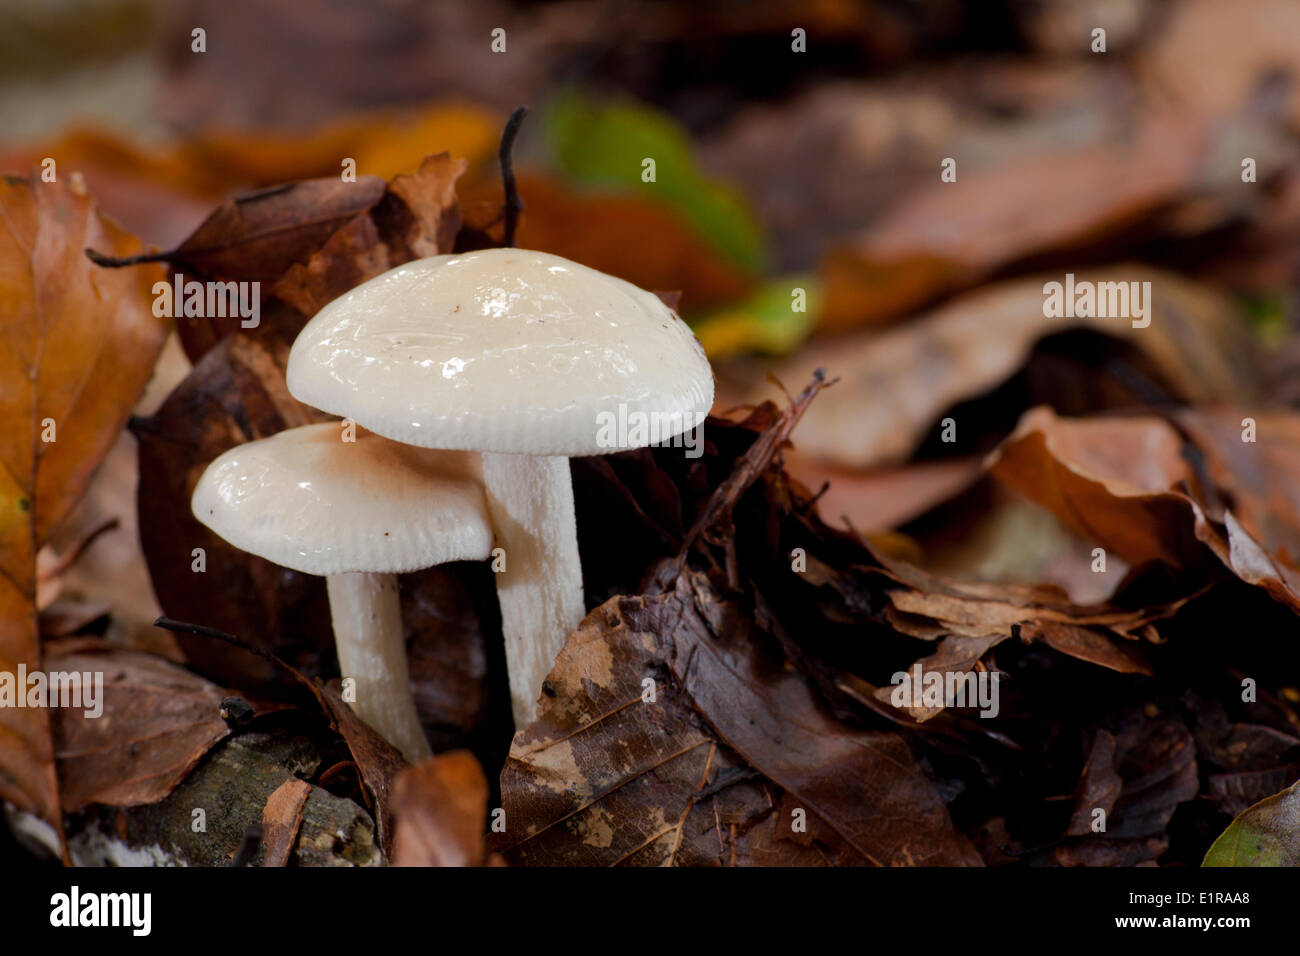 Hebeloma velutipes is a common species of forests in the Netherlands and Belgium. Stock Photo